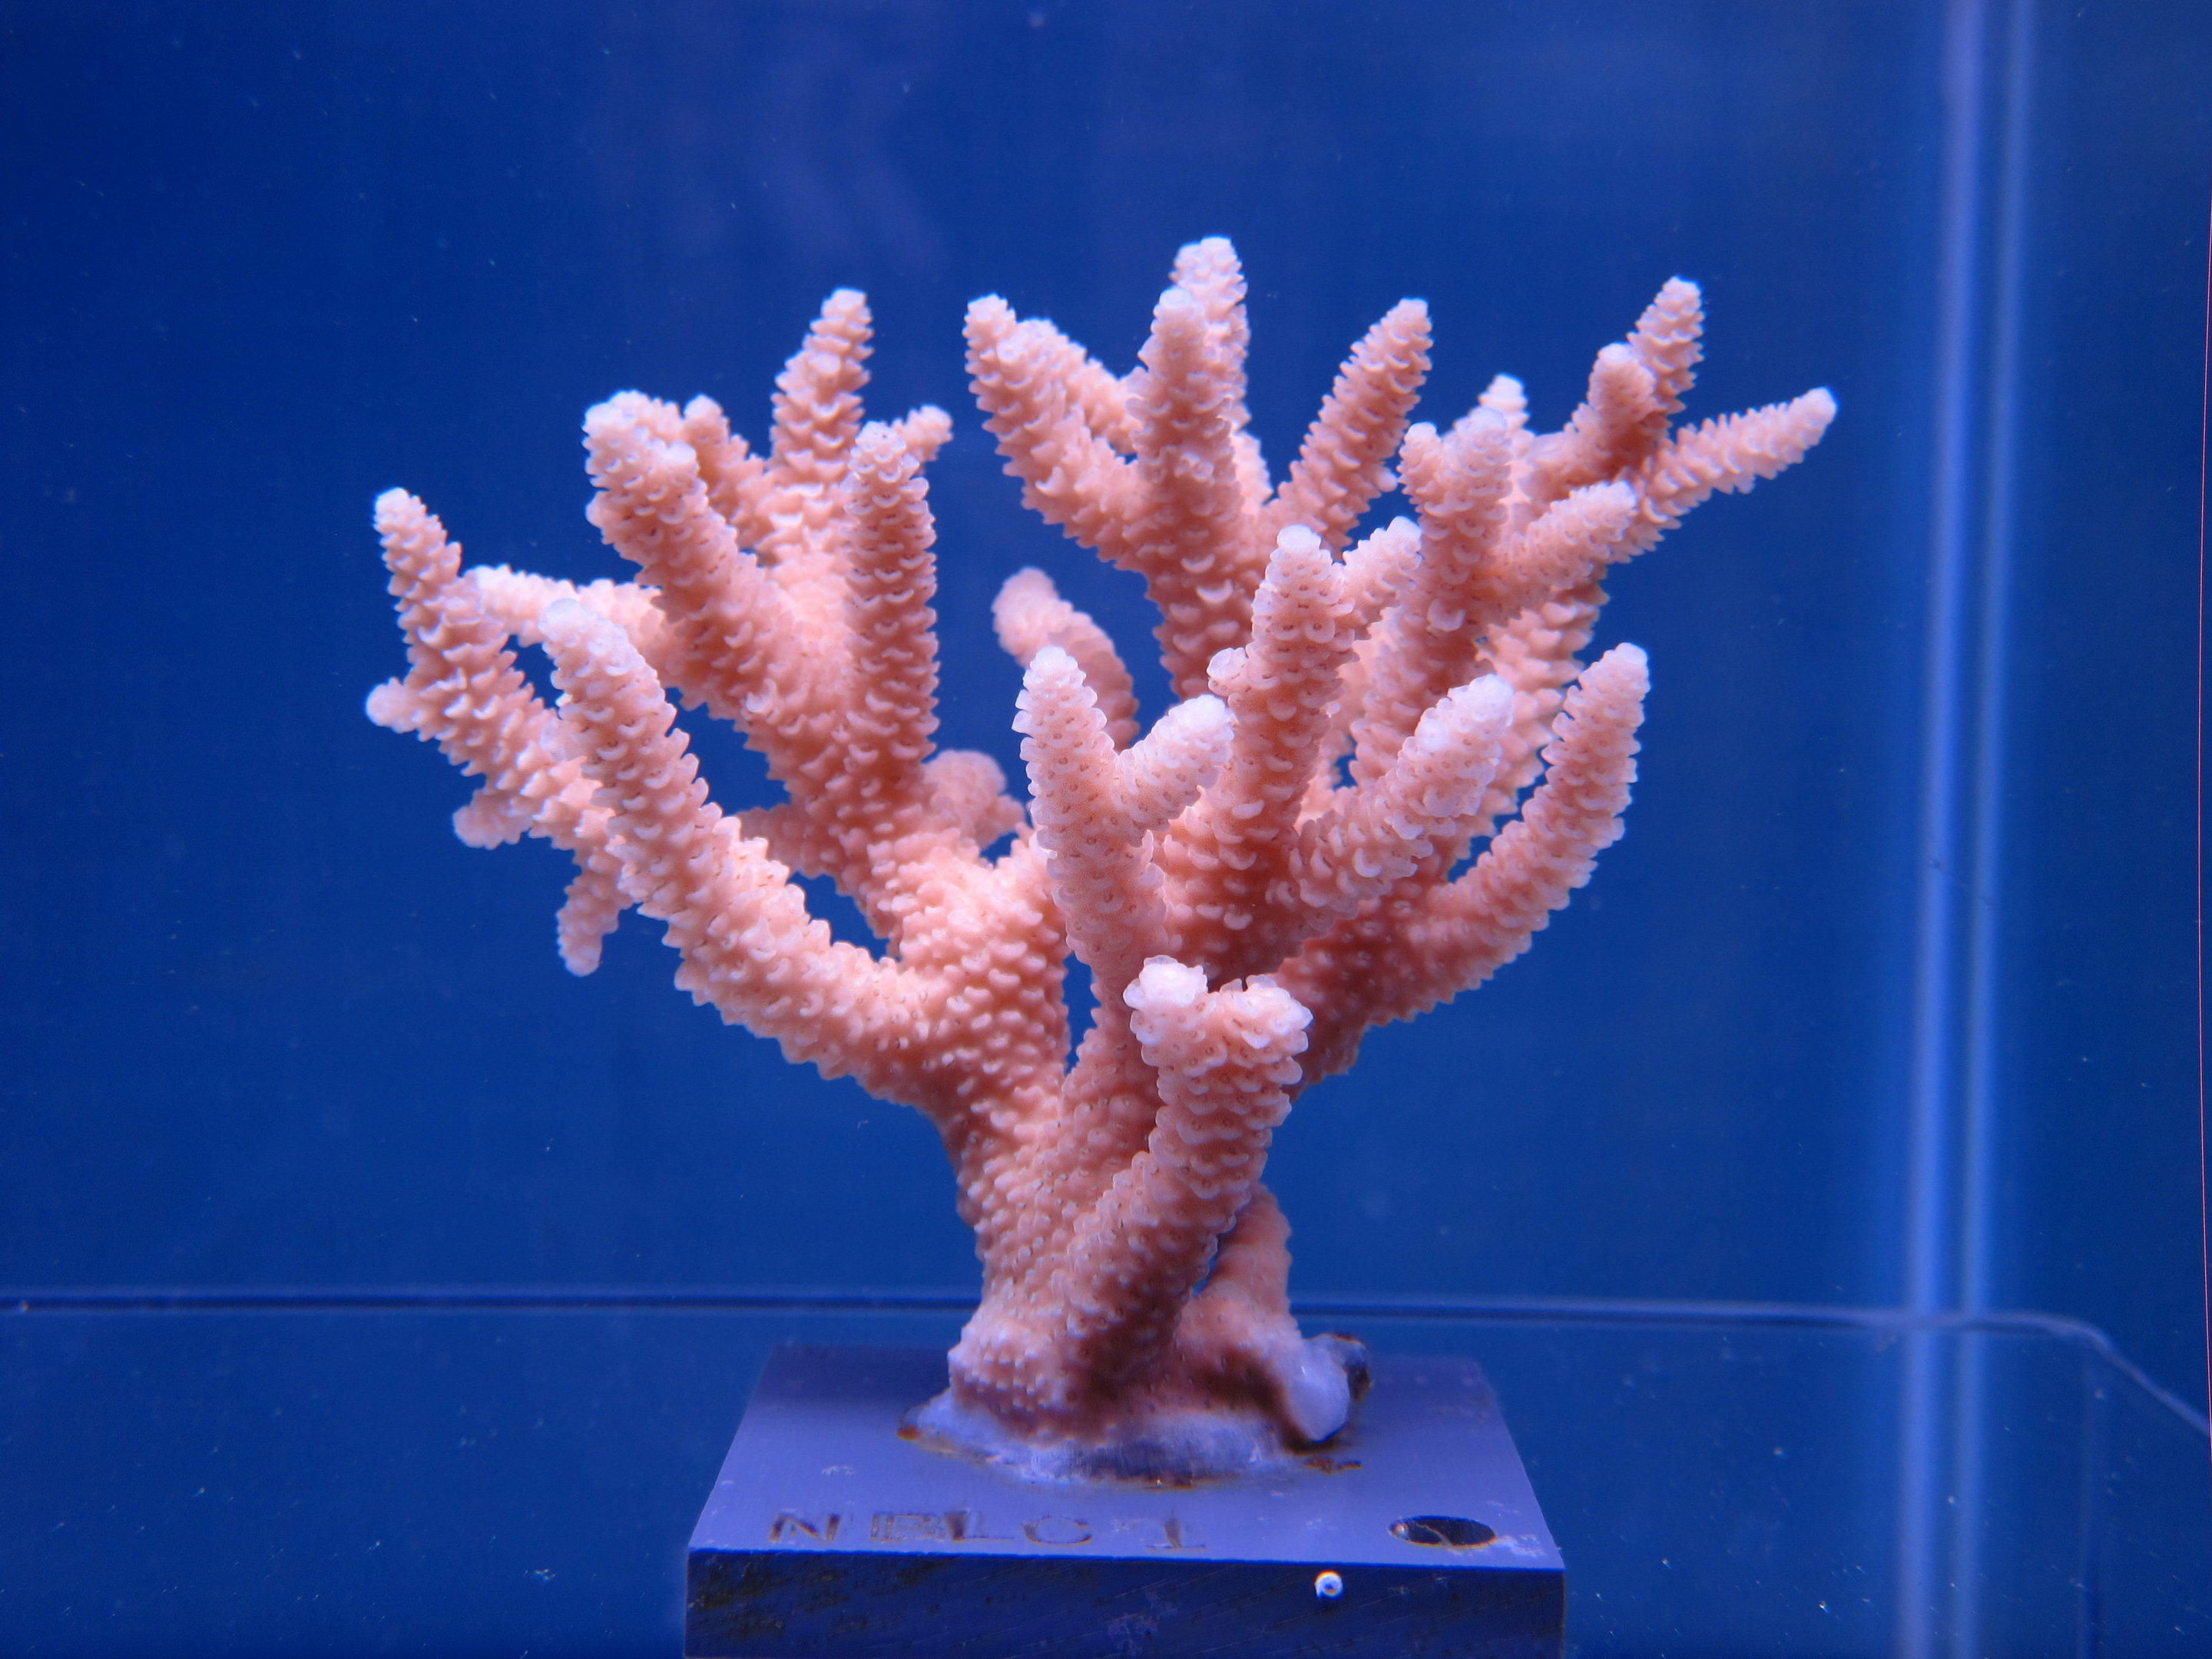 How climate change weakens coral 'immune systems'